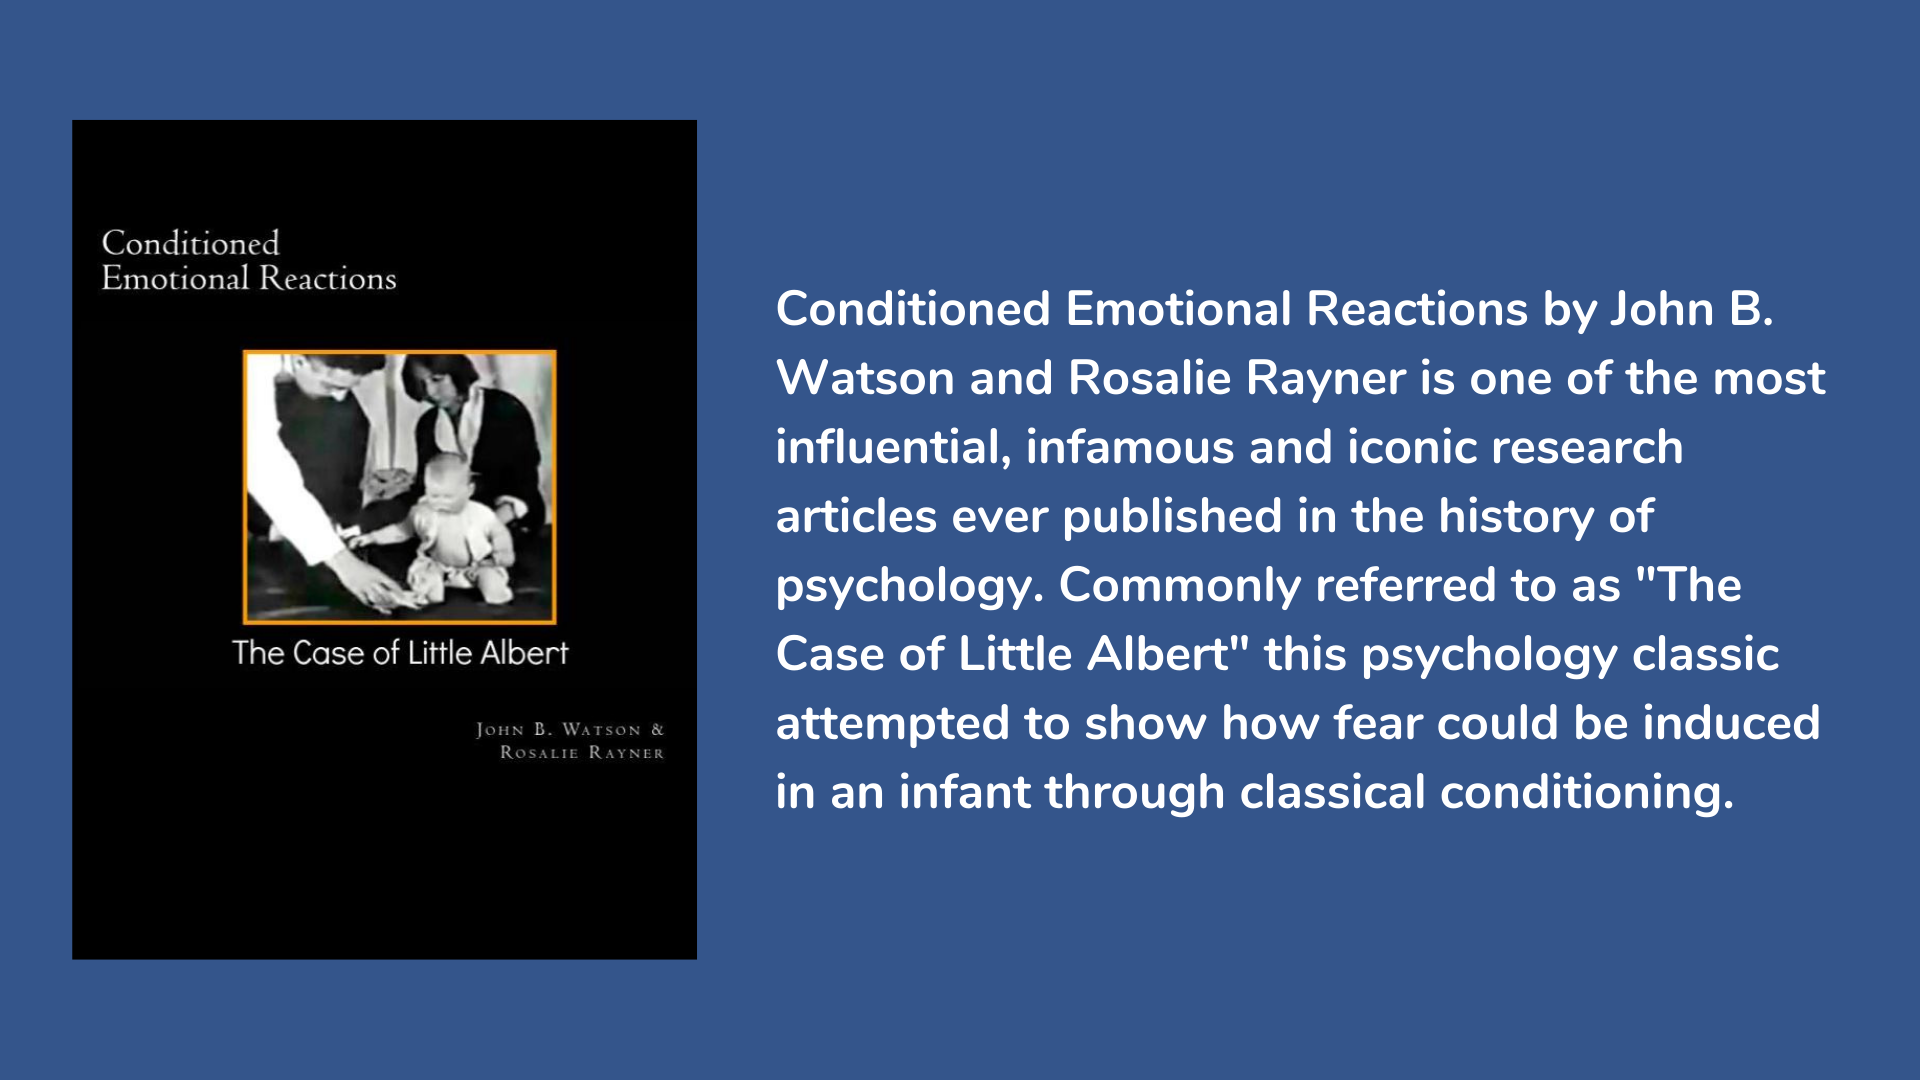 Book cover and information about Conditioned Emotional Reactions (The Case of Little Albert) by John B. Watson and Rosalie Rayner